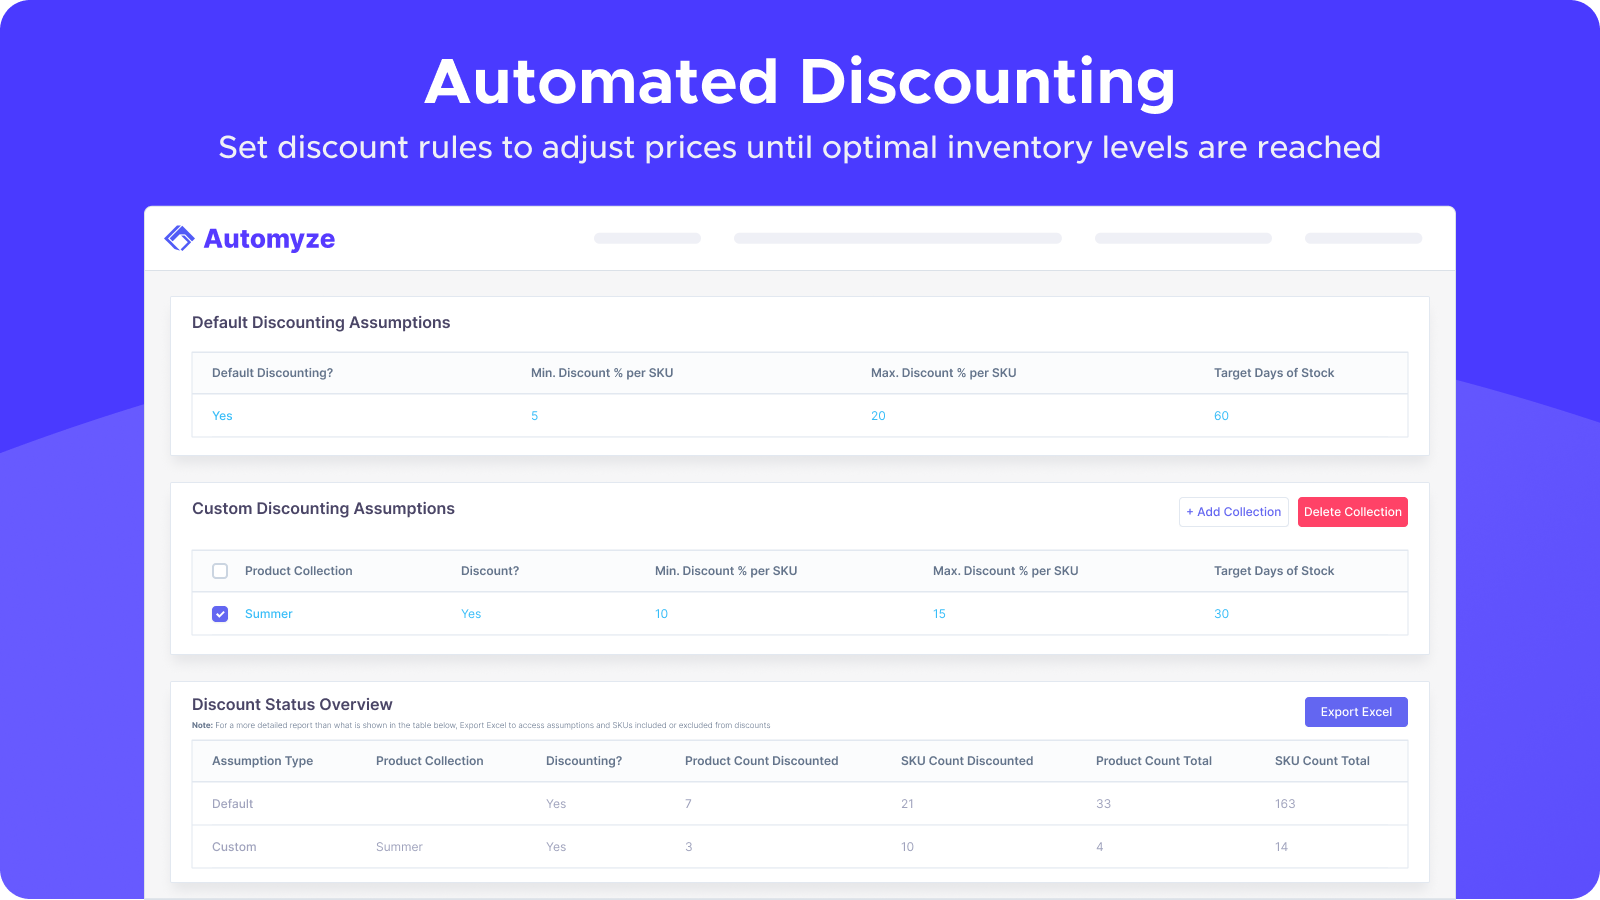 Apply discount rules that automatically adjust prices of desired product collections until optimal inventory levels are reached.